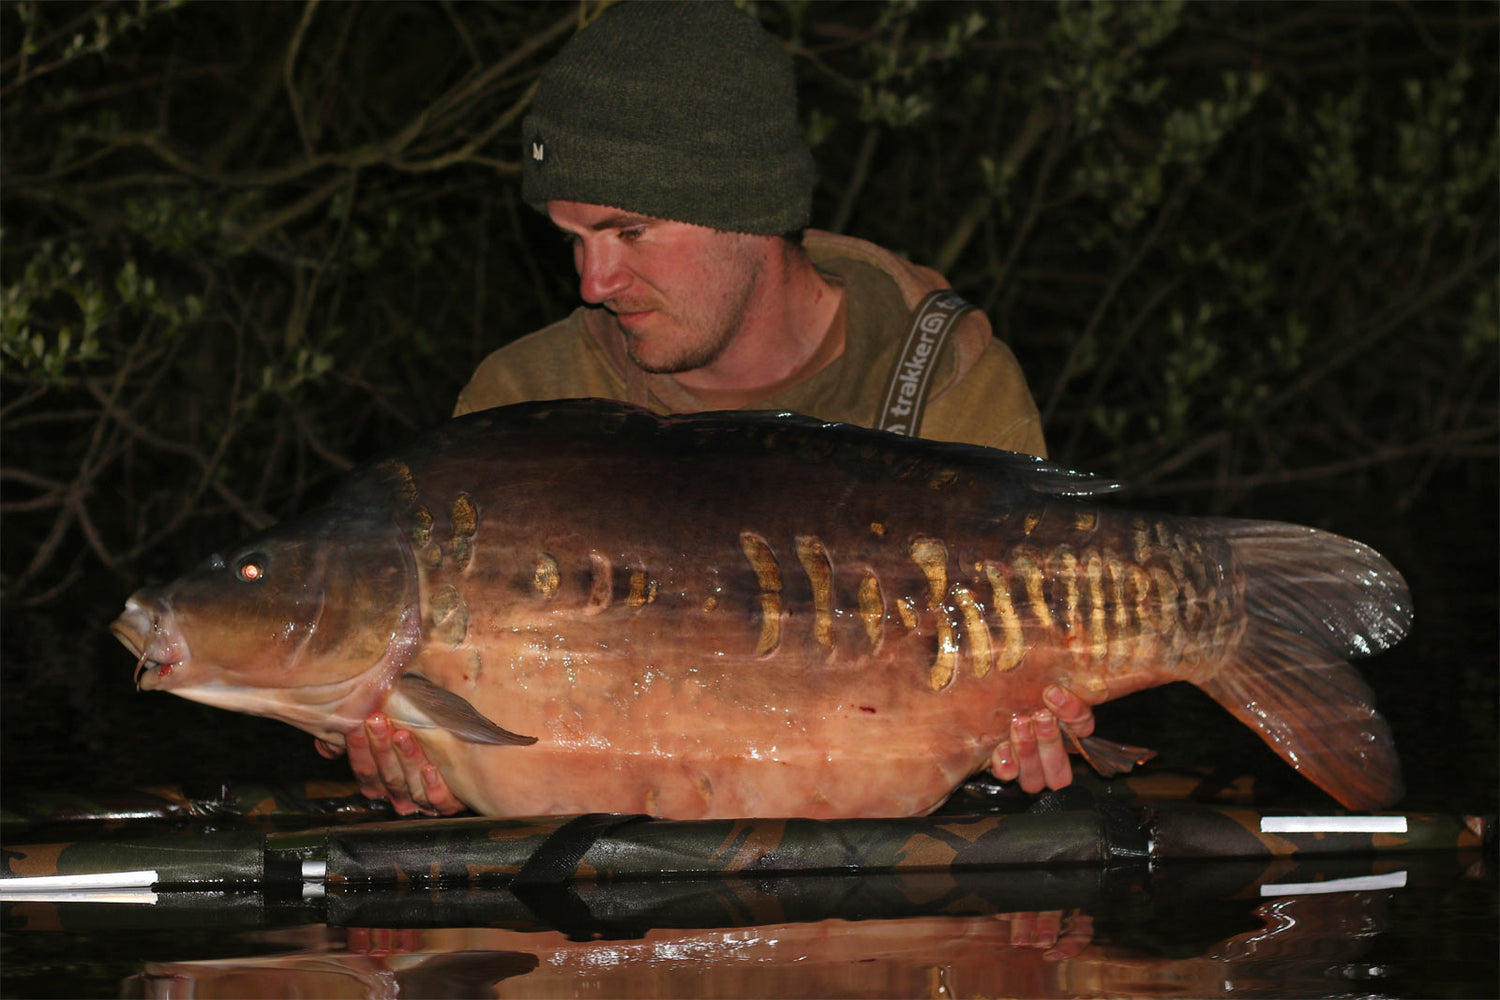 The most northerly Carp in the UK - Shoulders - Size 4 Duropoint curve shank hook